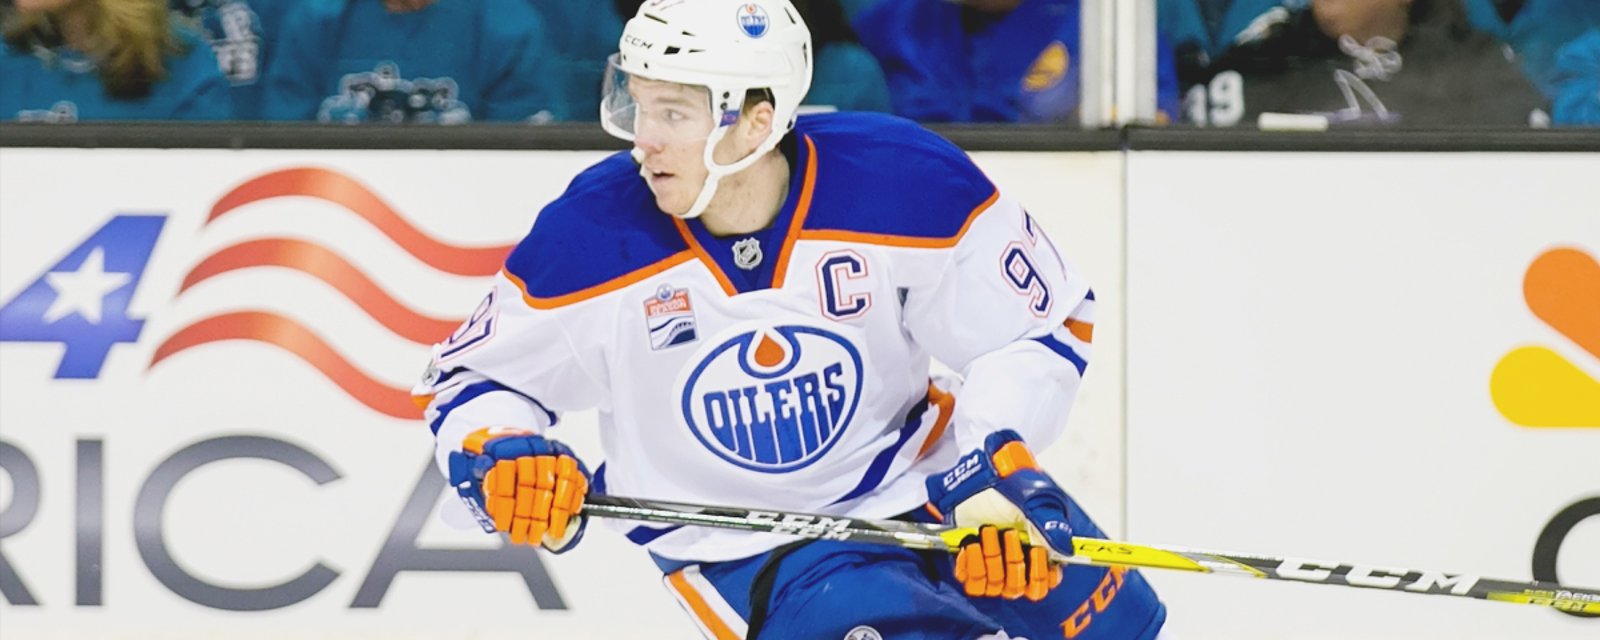 Frederick Andersen expects Edmonton Oilers SUPERSTAR Connor McDavid will be rocked.